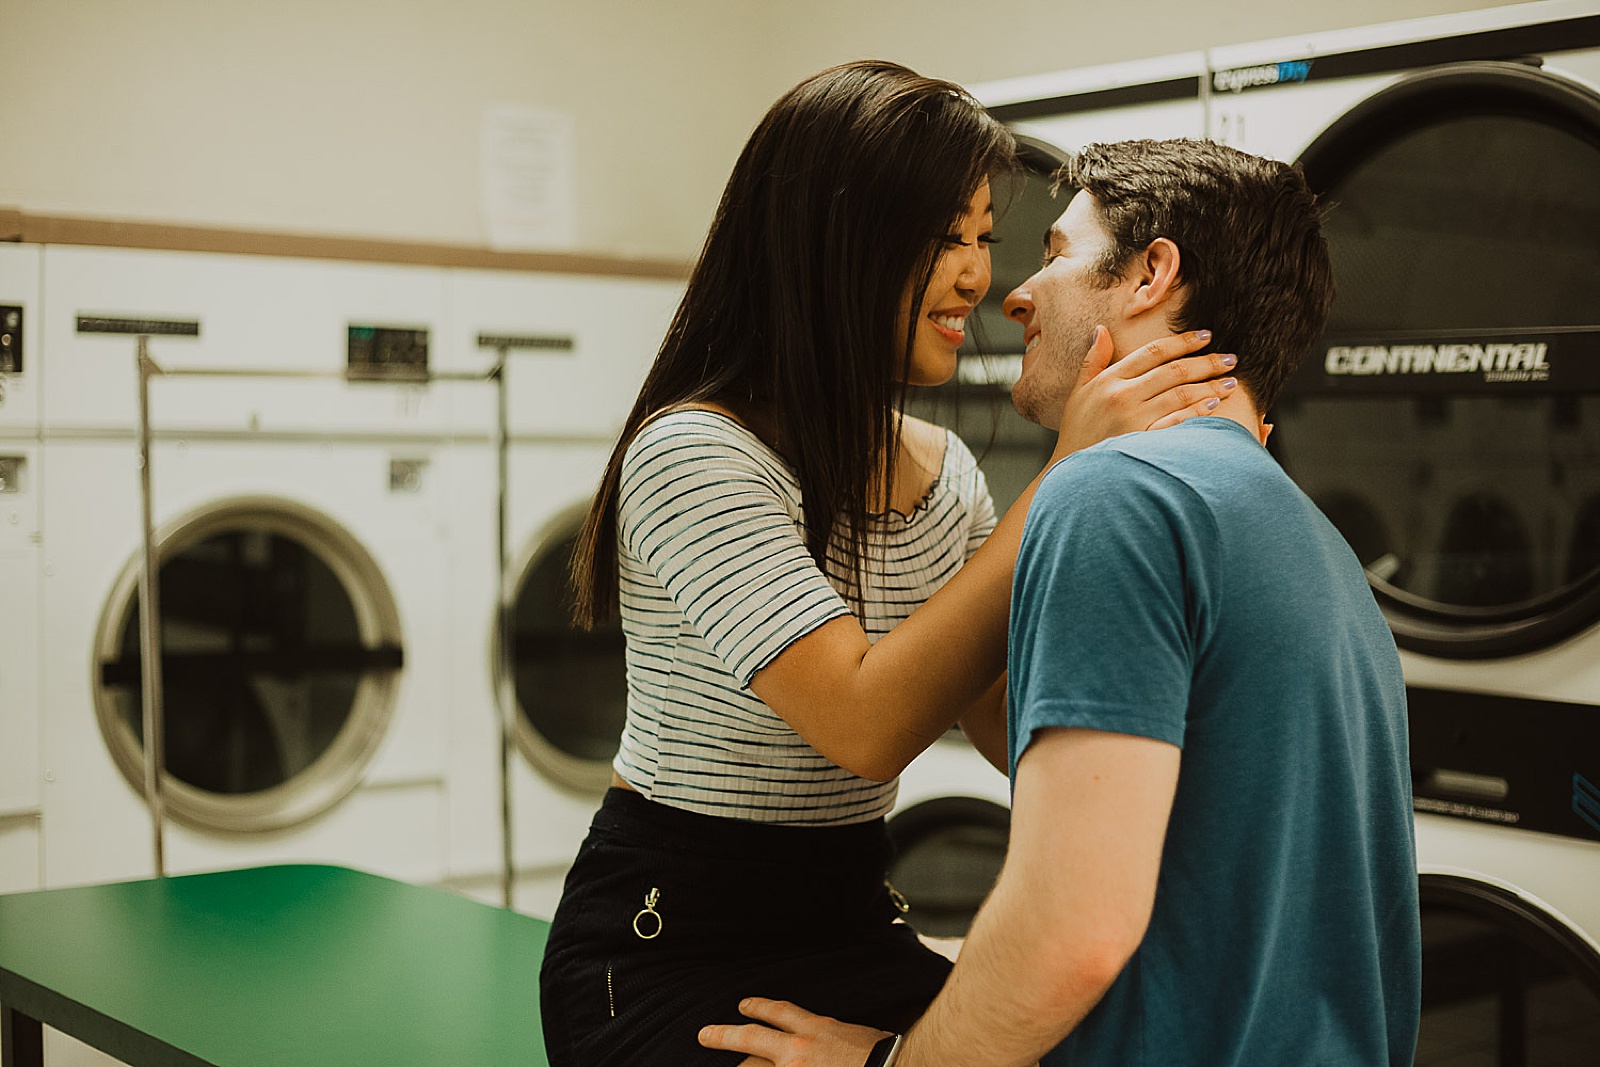 Cute Couple in Laundromat Embracing Engagement Photos taken by Kansas City Engagement Photographer, Caitlyn Cloud Photography